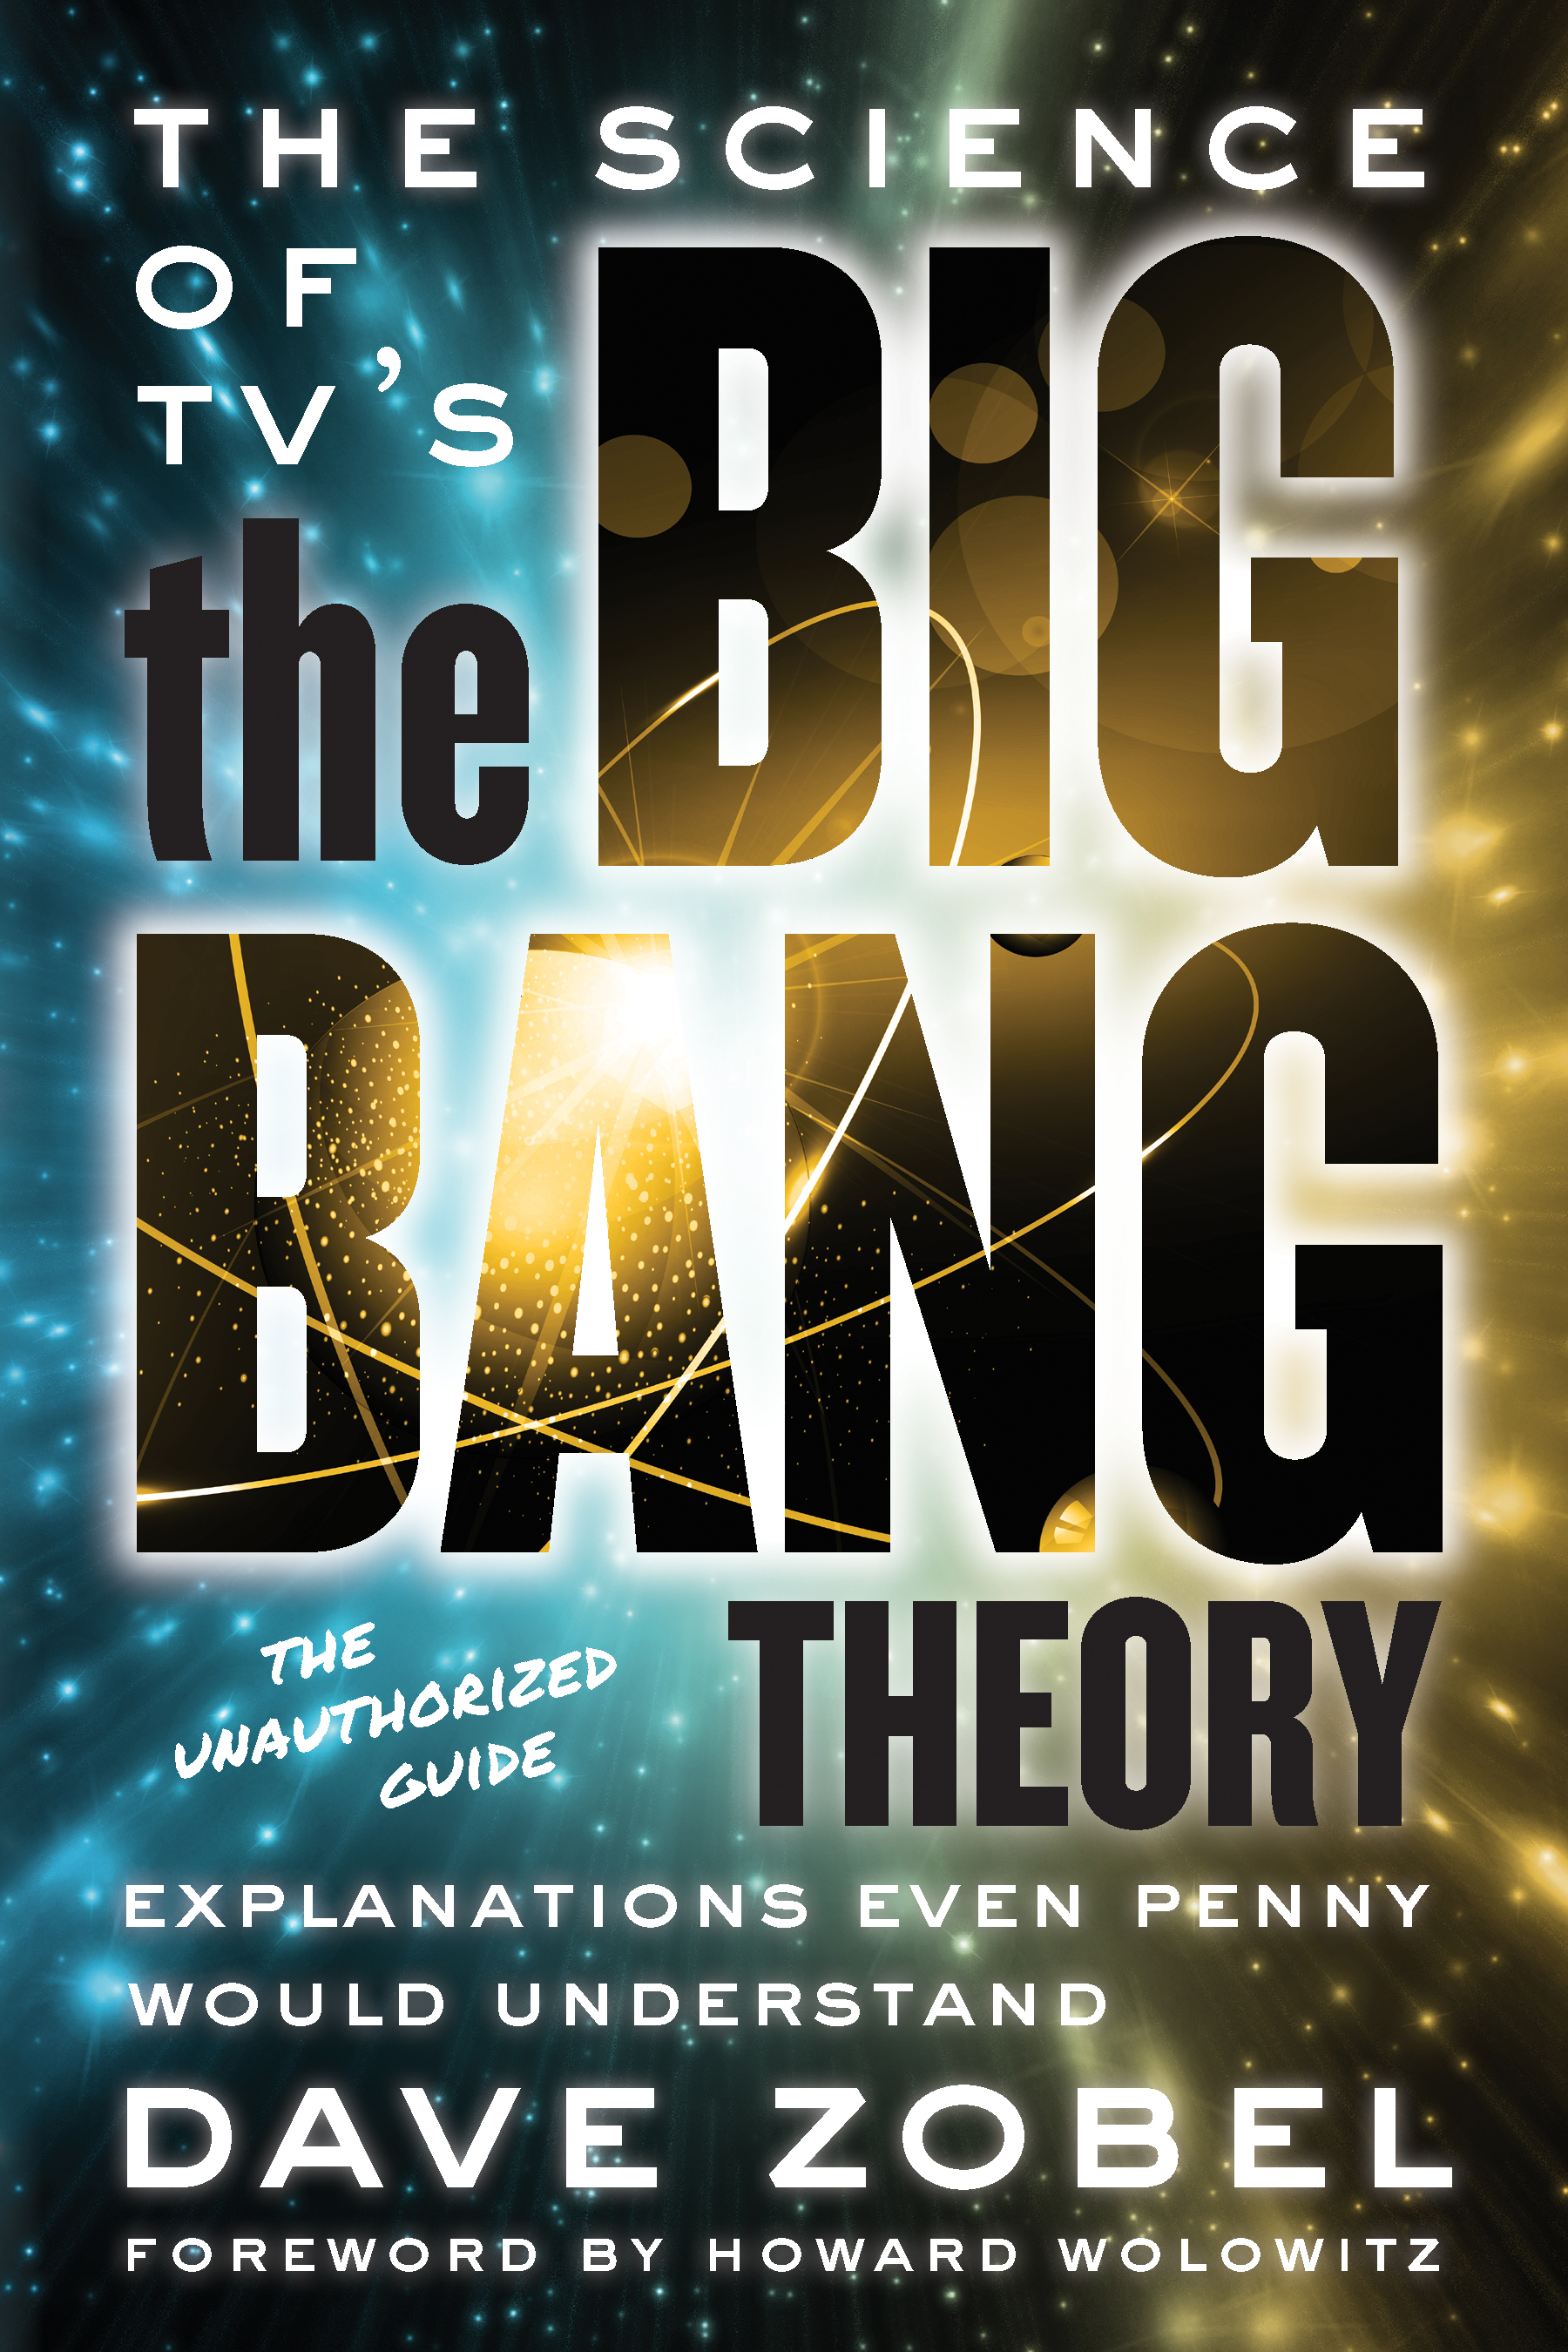 The Science of TV's 'The Big Bang Theory': Explanations Even Penny Would Understand